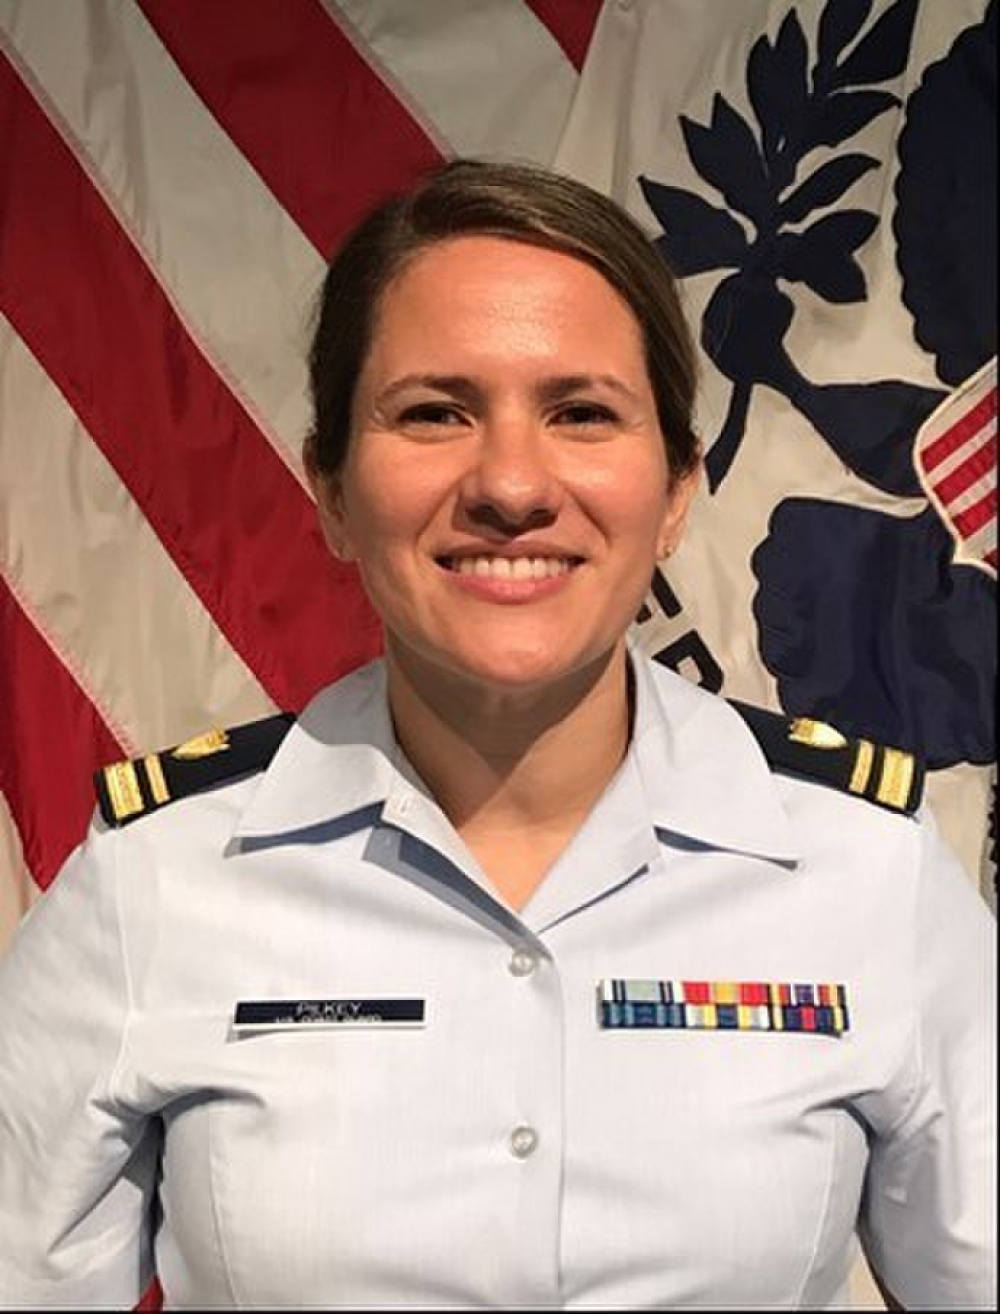 Lt. j.g. Shirley Pilkey currently serves as an Equal Opportunity Advisor with the Coast Guard's Civil Rights Directorate at Region 1, Zone 2 (U.S. Coast Guard Photo).